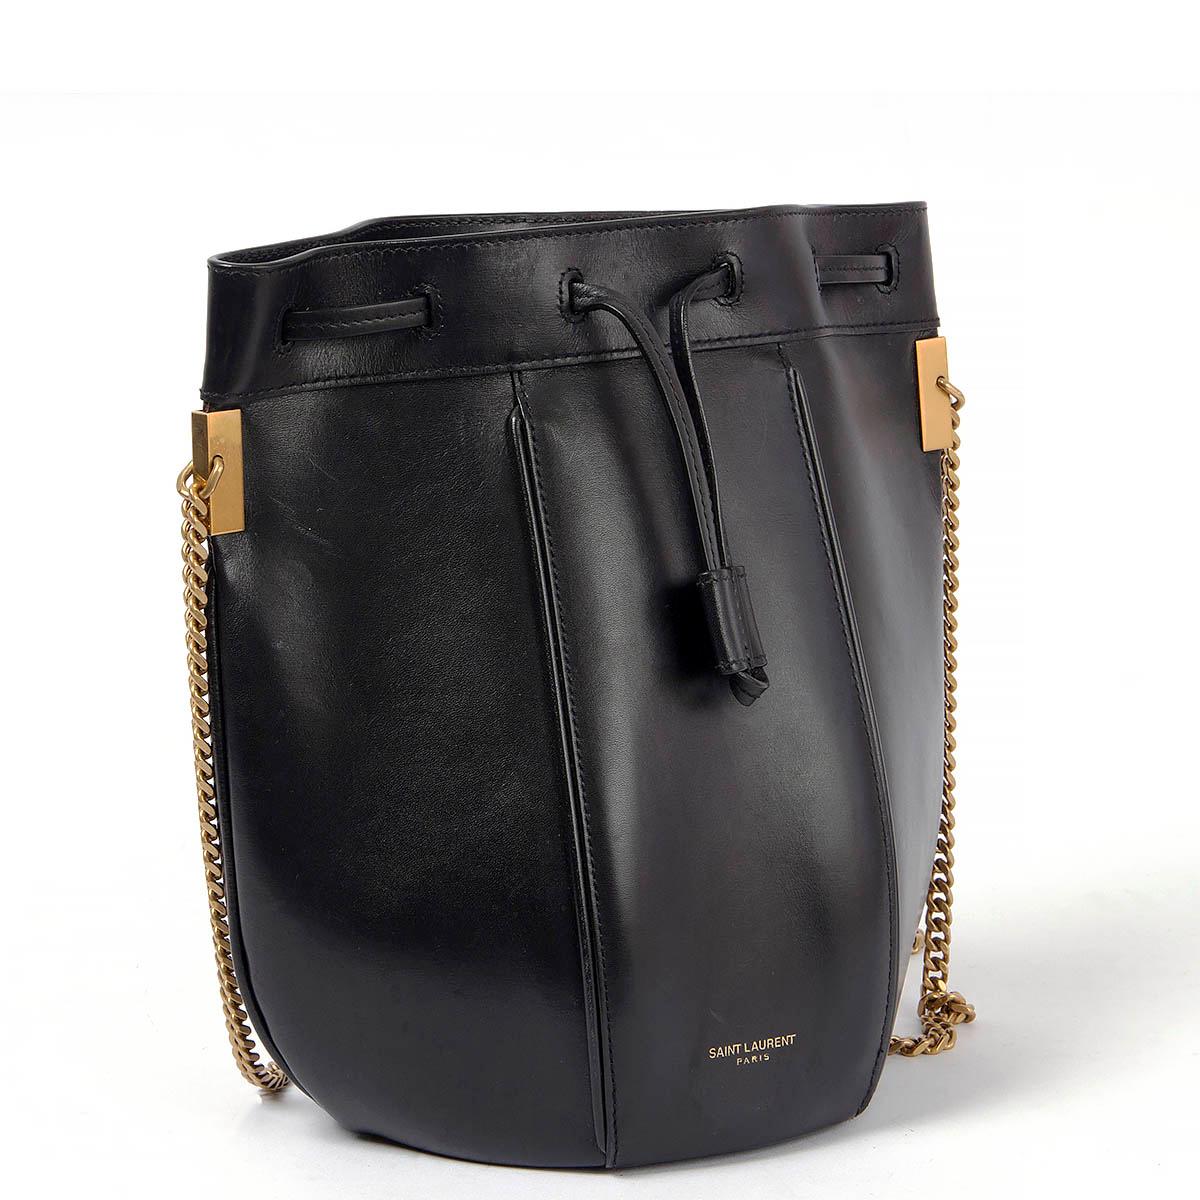 100% authentic Saint Laurent Talitha bucket bag in smooth black leather featuring antique gold-tone chain shoulder-strap. Lined in black grosgrain with one open pocket against the back. Has been carried and shows some scratches especially on the